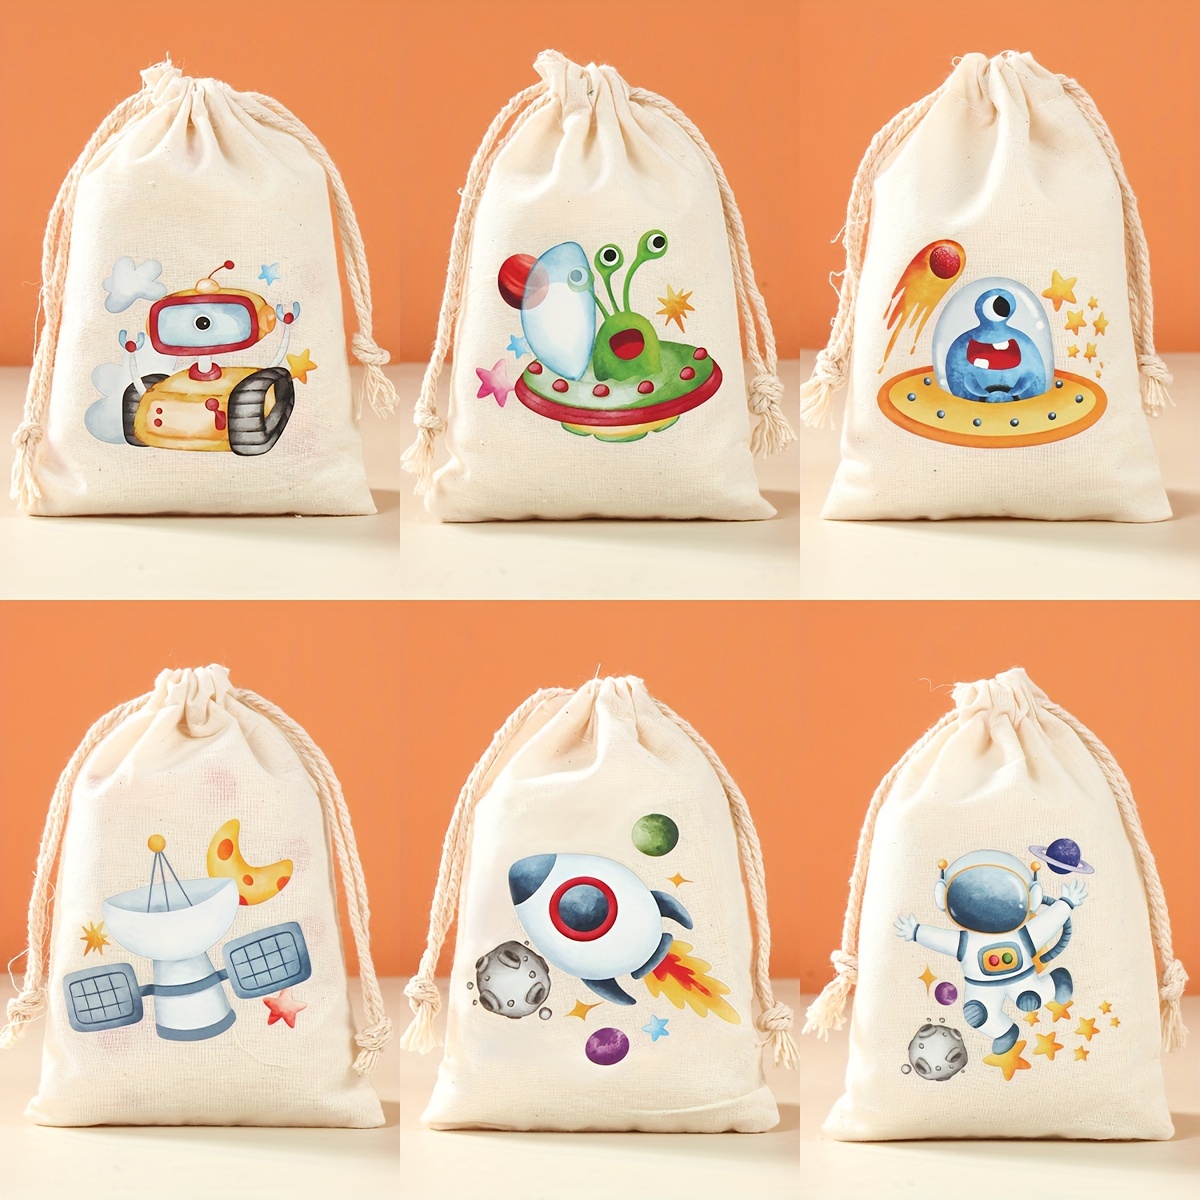 

6pcs/set Astronaut Cotton Gifts Bag Spaceship Theme Alien Planet Astronauts Birthday Party Decoration For Guests Happy 1st Birthday Supplies Packing Bags